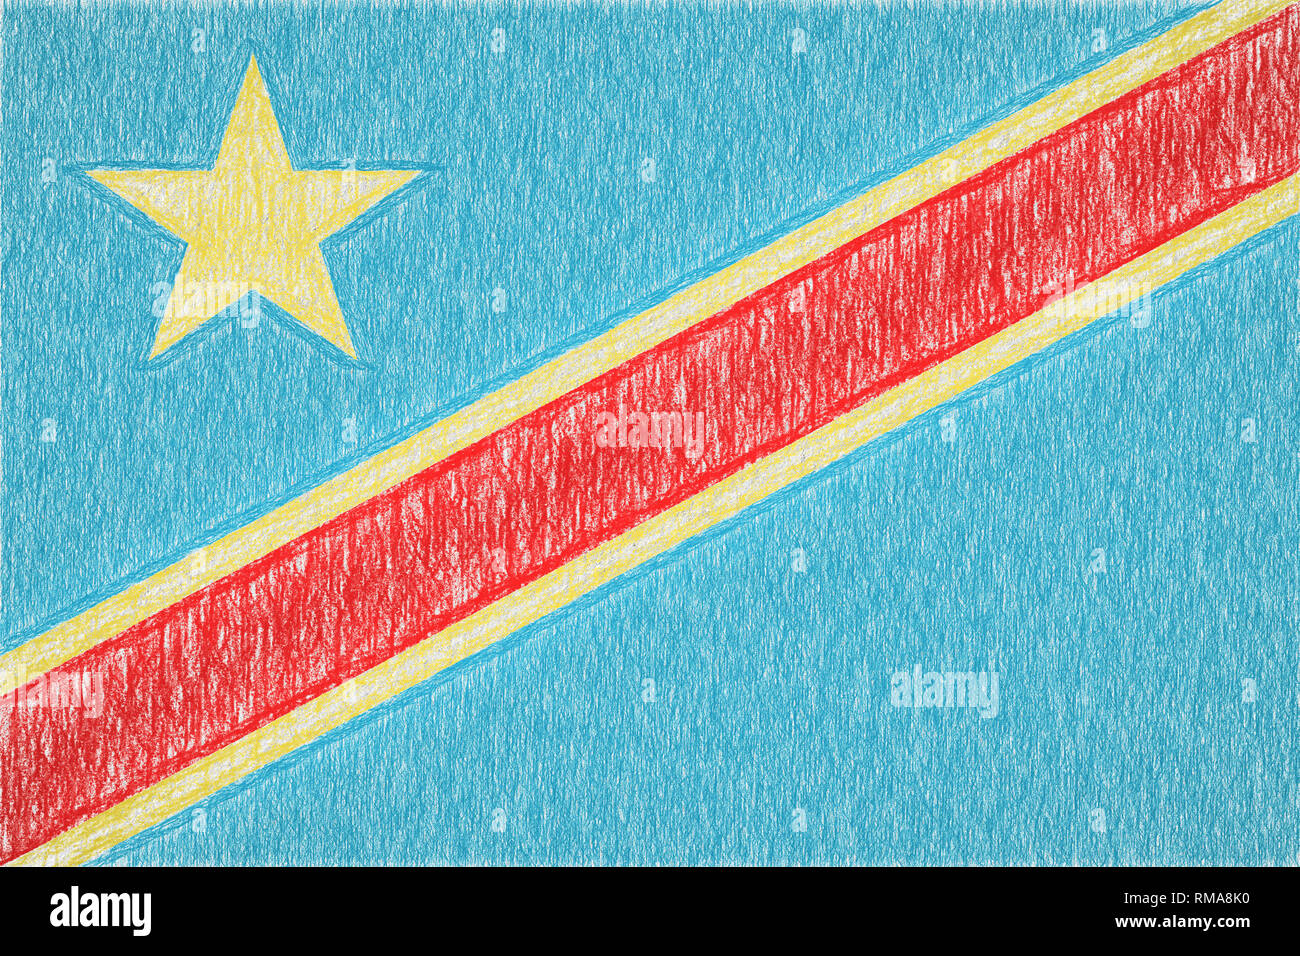 Democratic Republic of the Congo painted flag. Patriotic drawing on paper background. National flag of Democratic Republic of the Congo Stock Photo